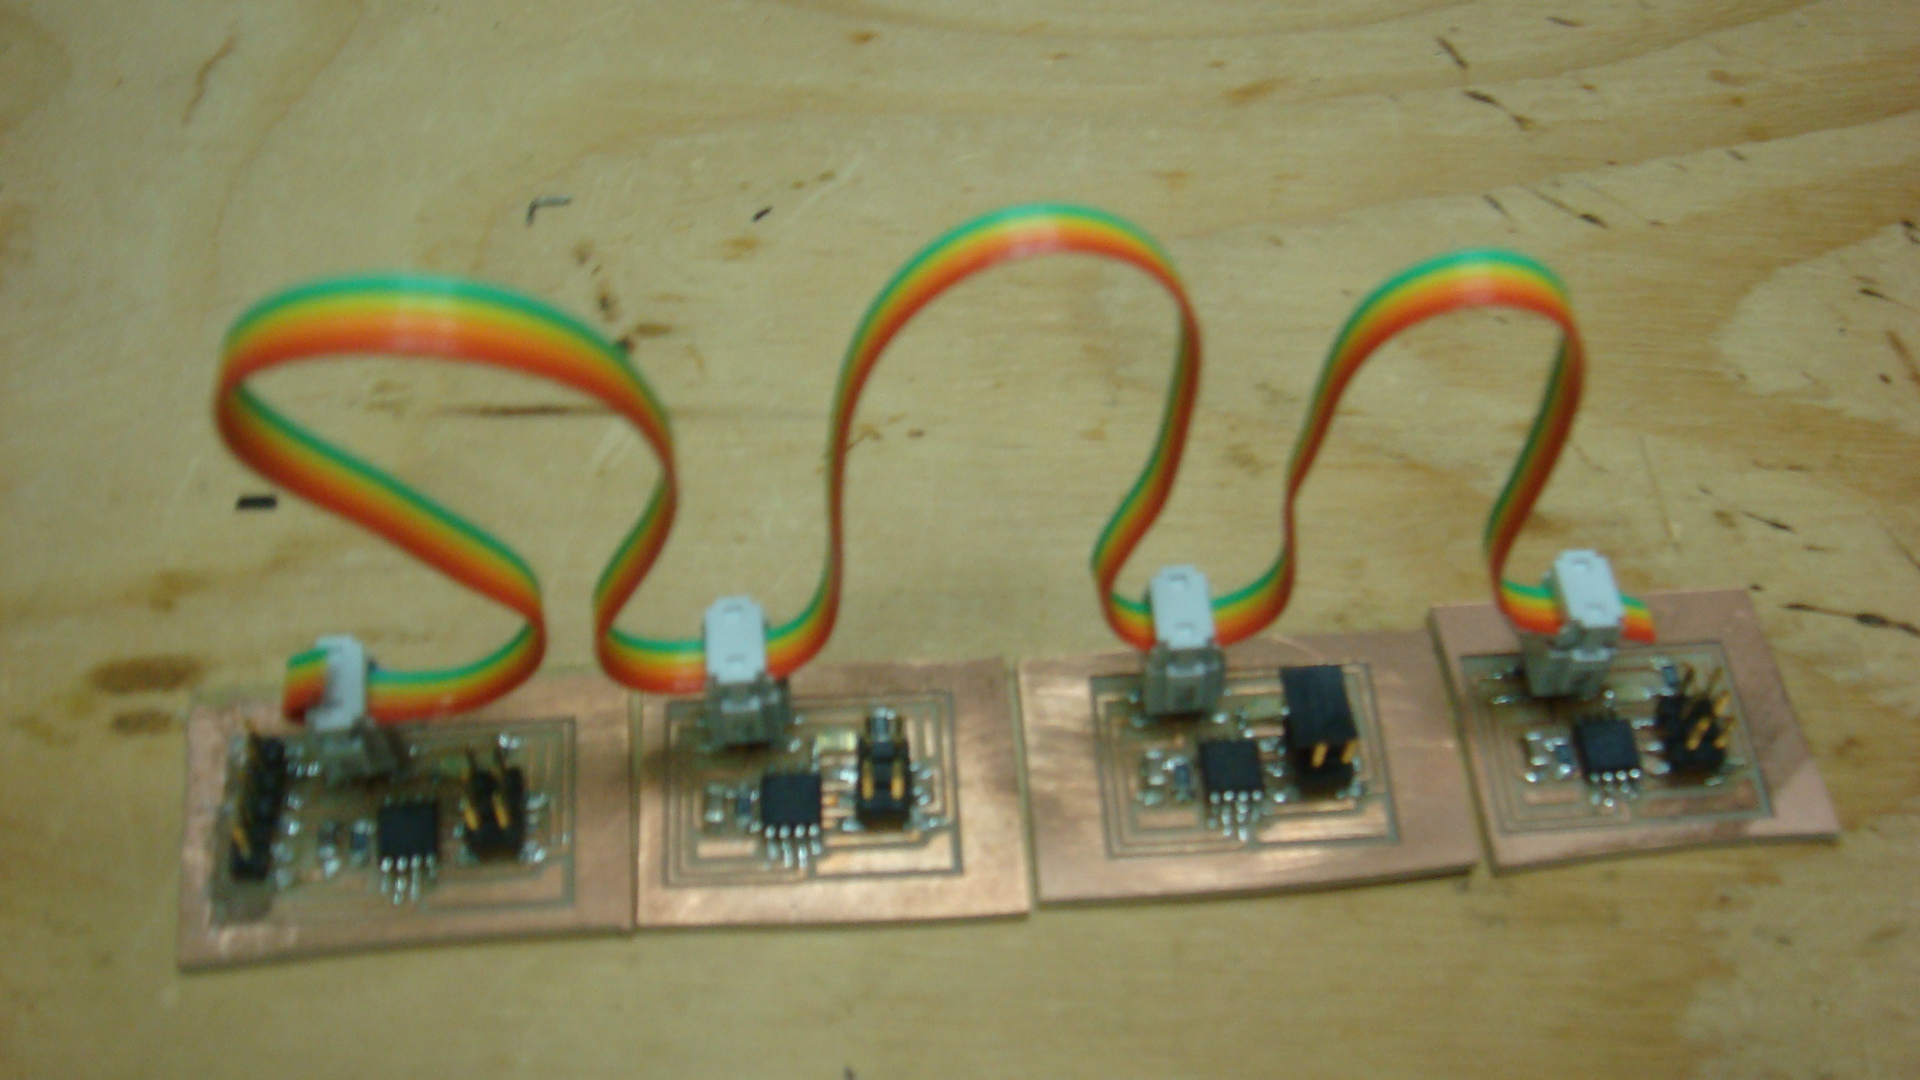 Bridge and Node boards with ribbon cable